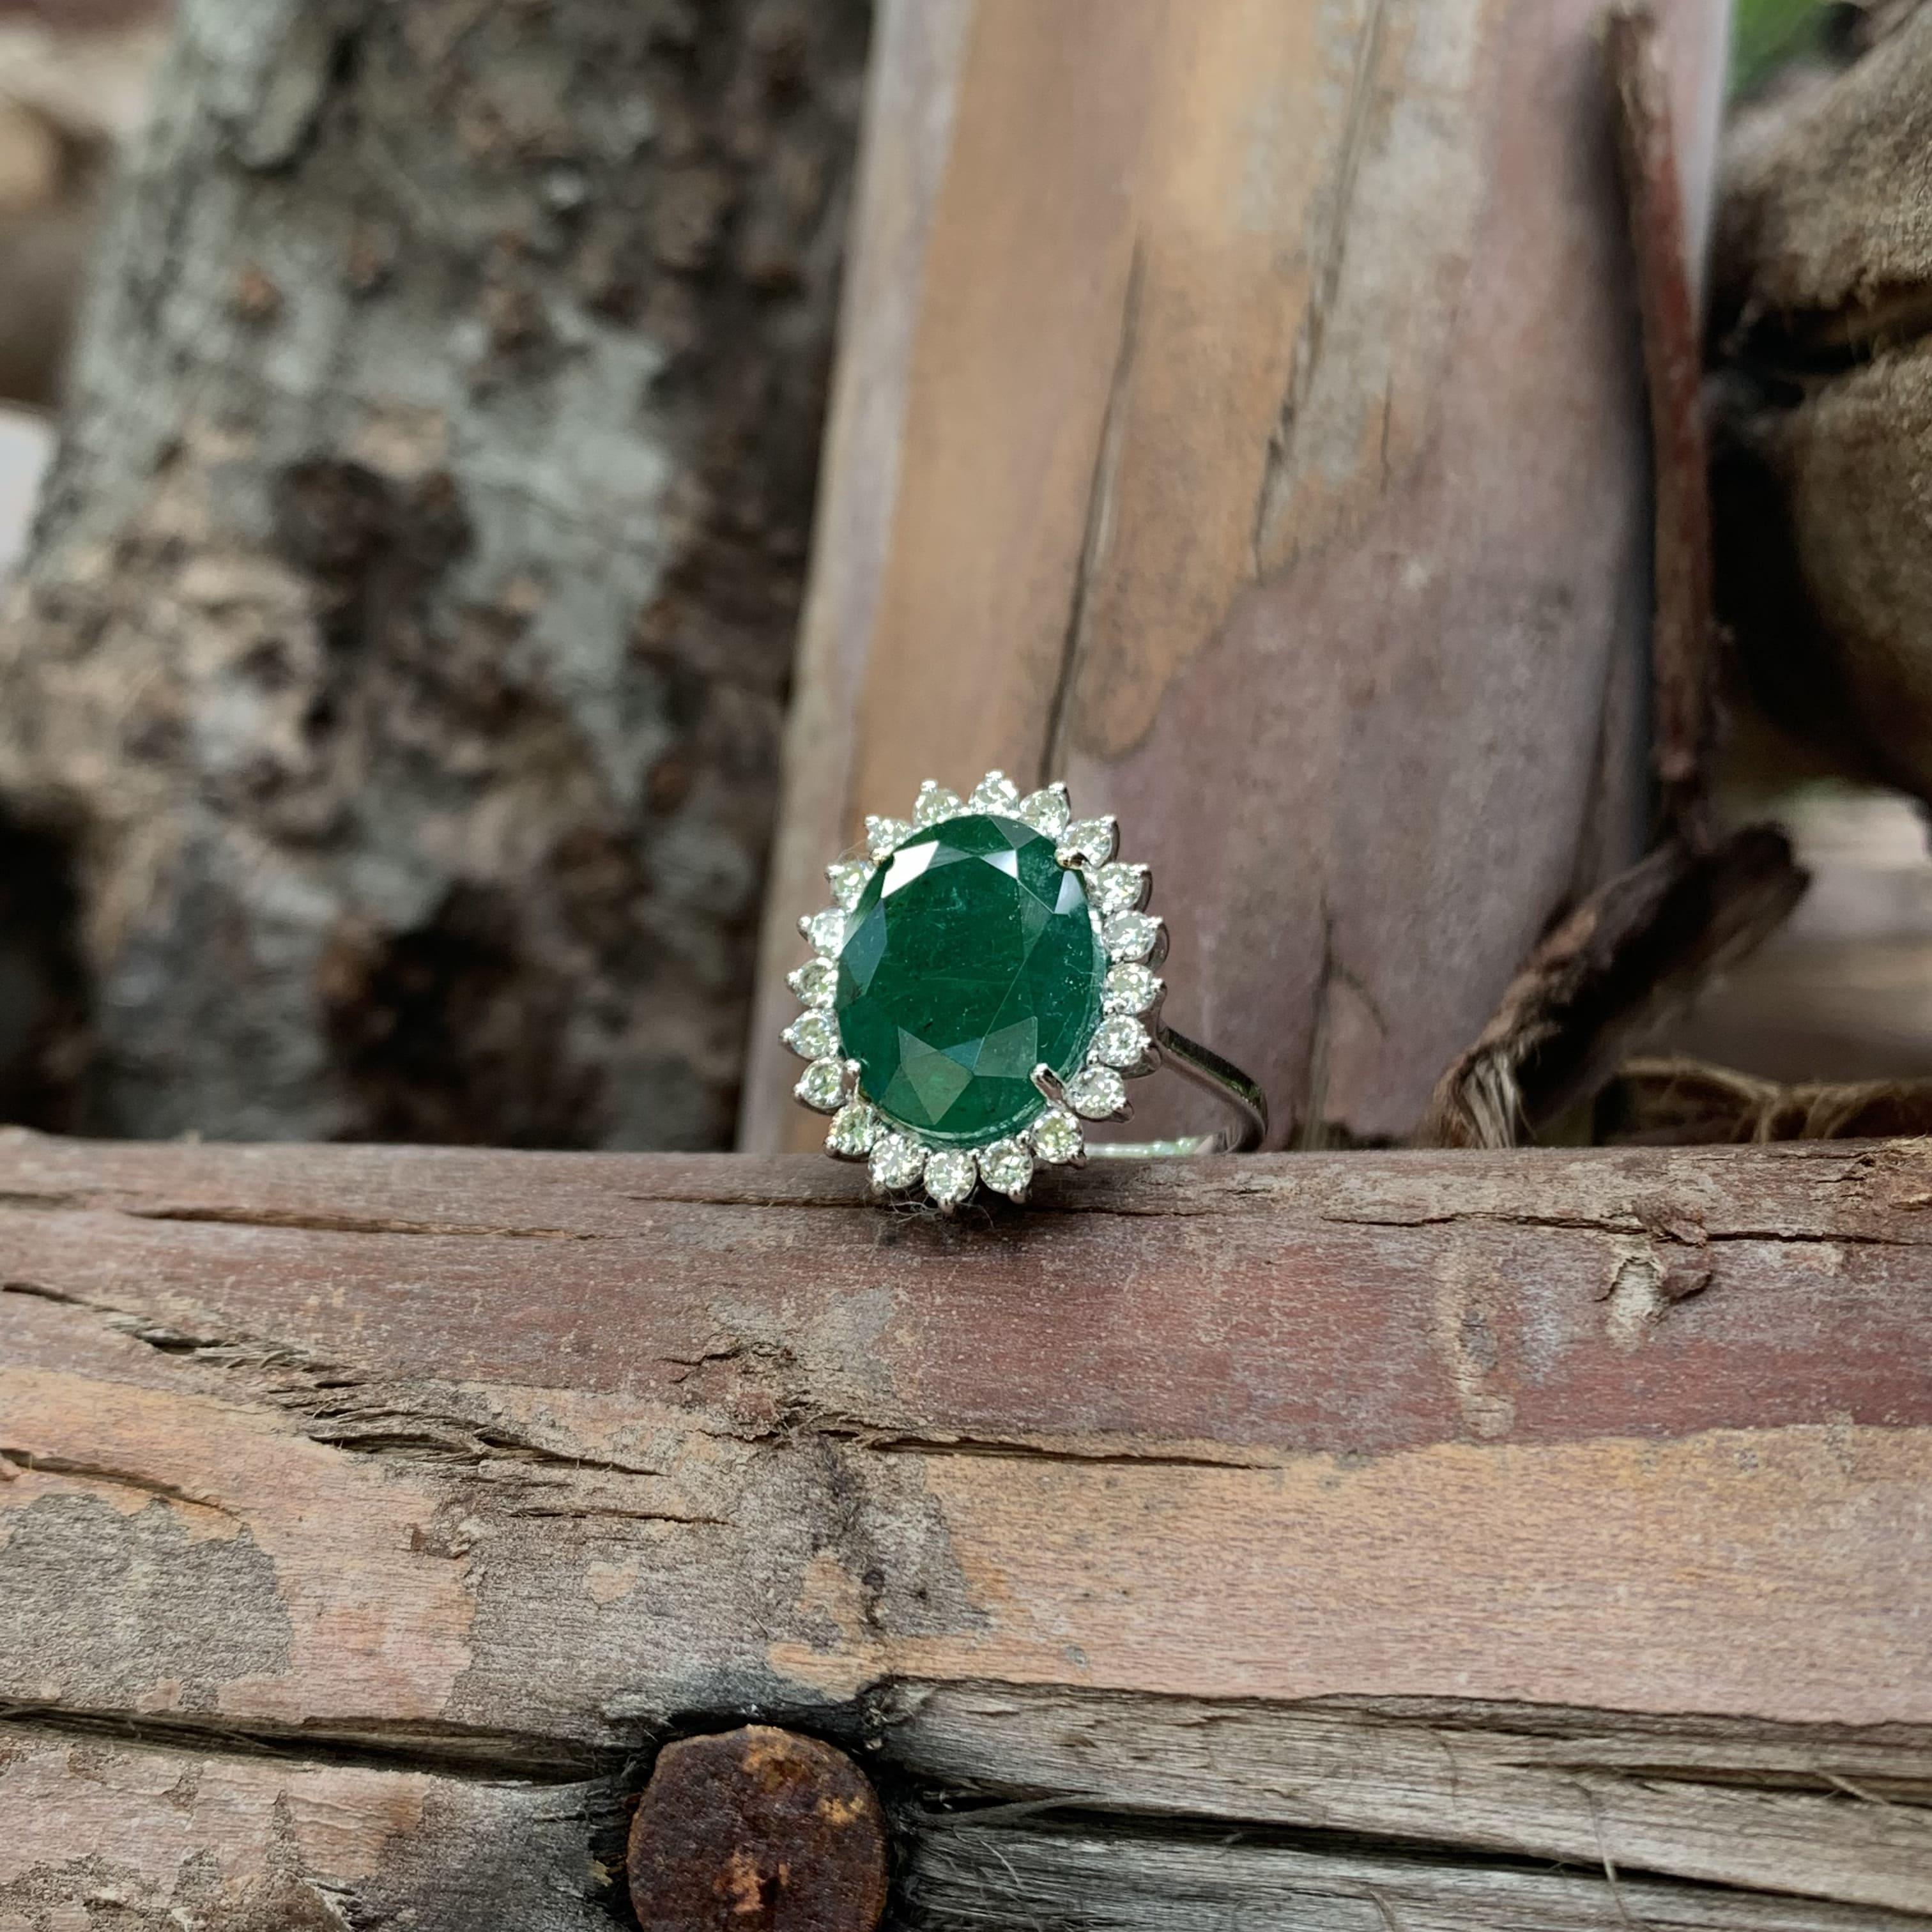 Victorian Christmas Special 7.11 Carat Zambian Emerald Ring with Old Cut Diamonds